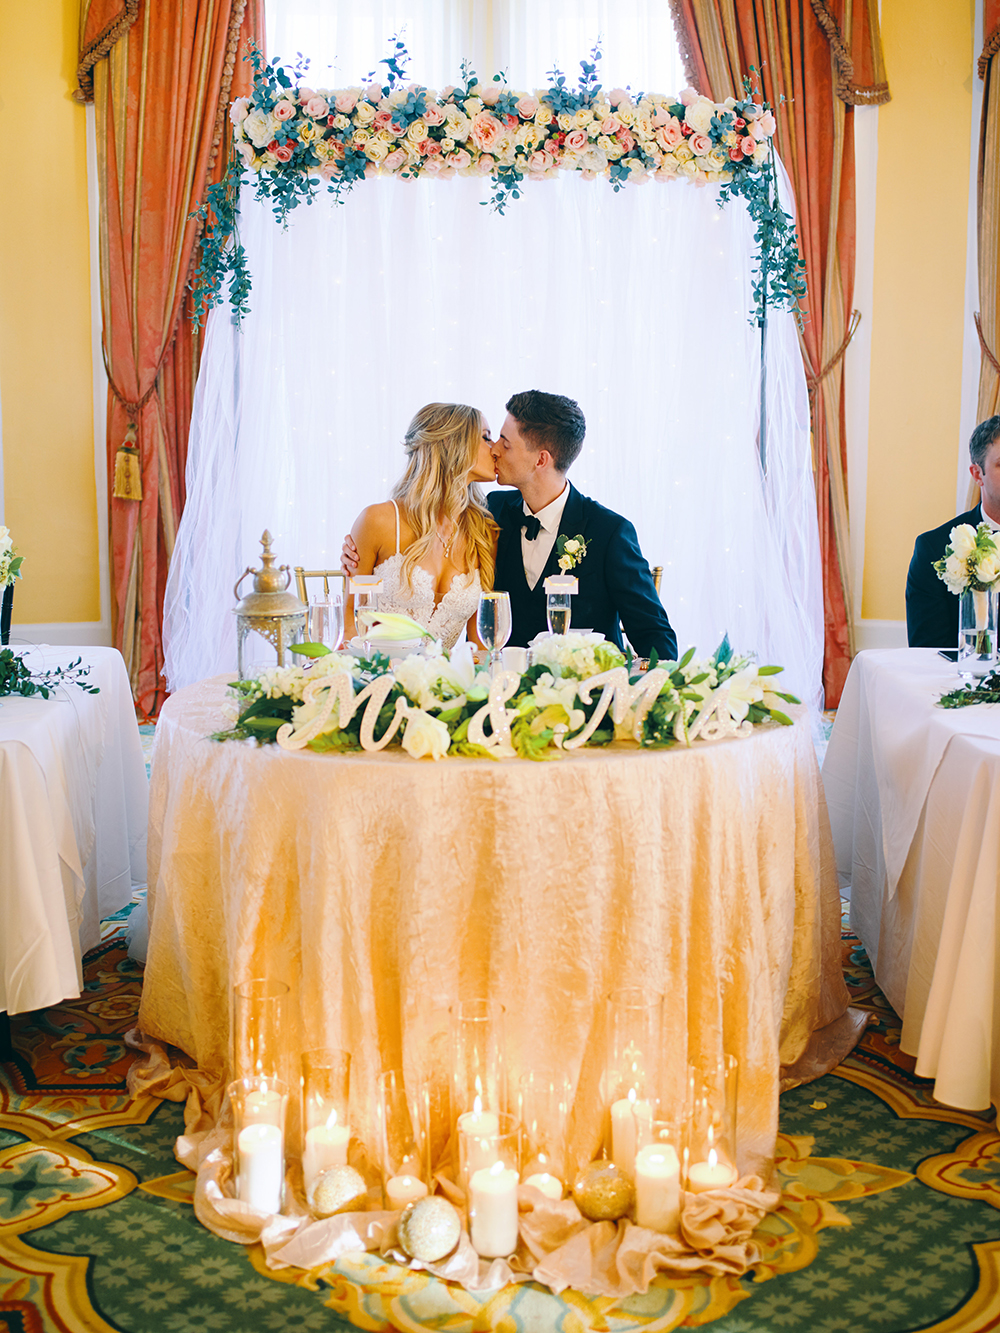 his & her table - wedding photography - white roses - greenery